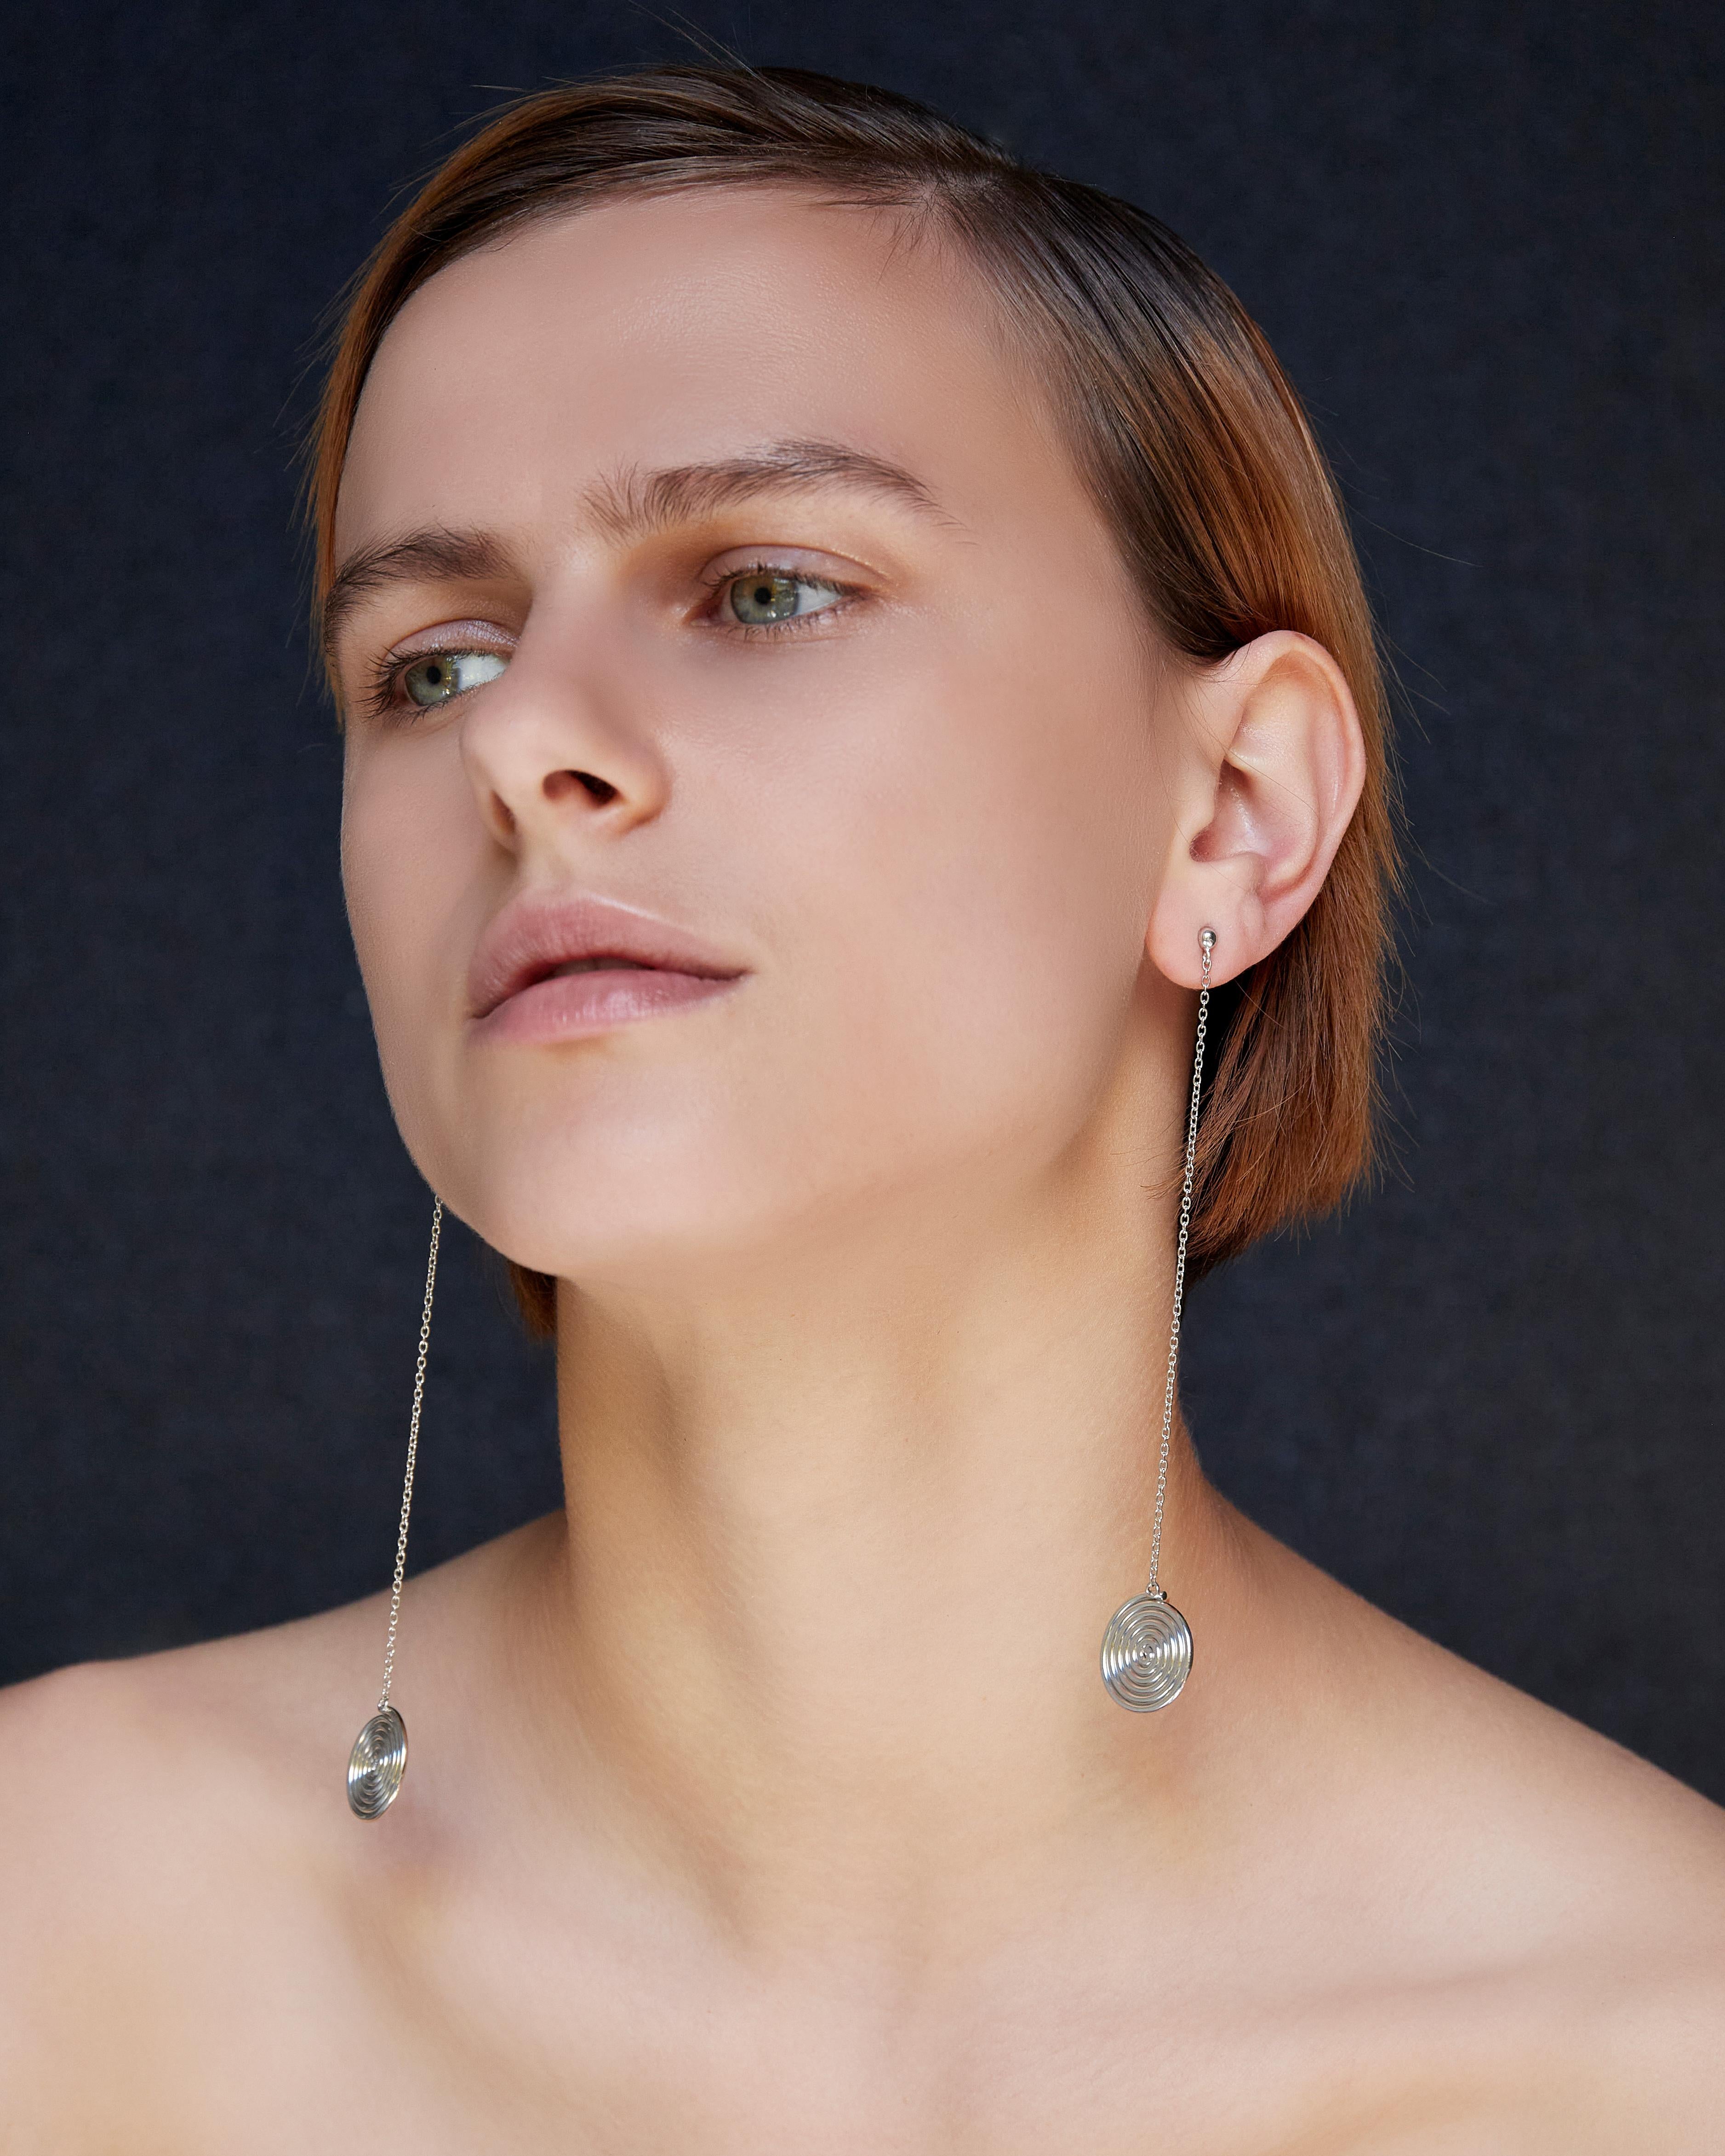 BAR Jewellery, London UK, NEVERENDING ROAD EARRINGS, Sterling Silver 

The Neverending road earrings are a playful drop style, inspired by the work of artists Terry Frost and Alexander Calder. These earrings are best worn with the hair tied back